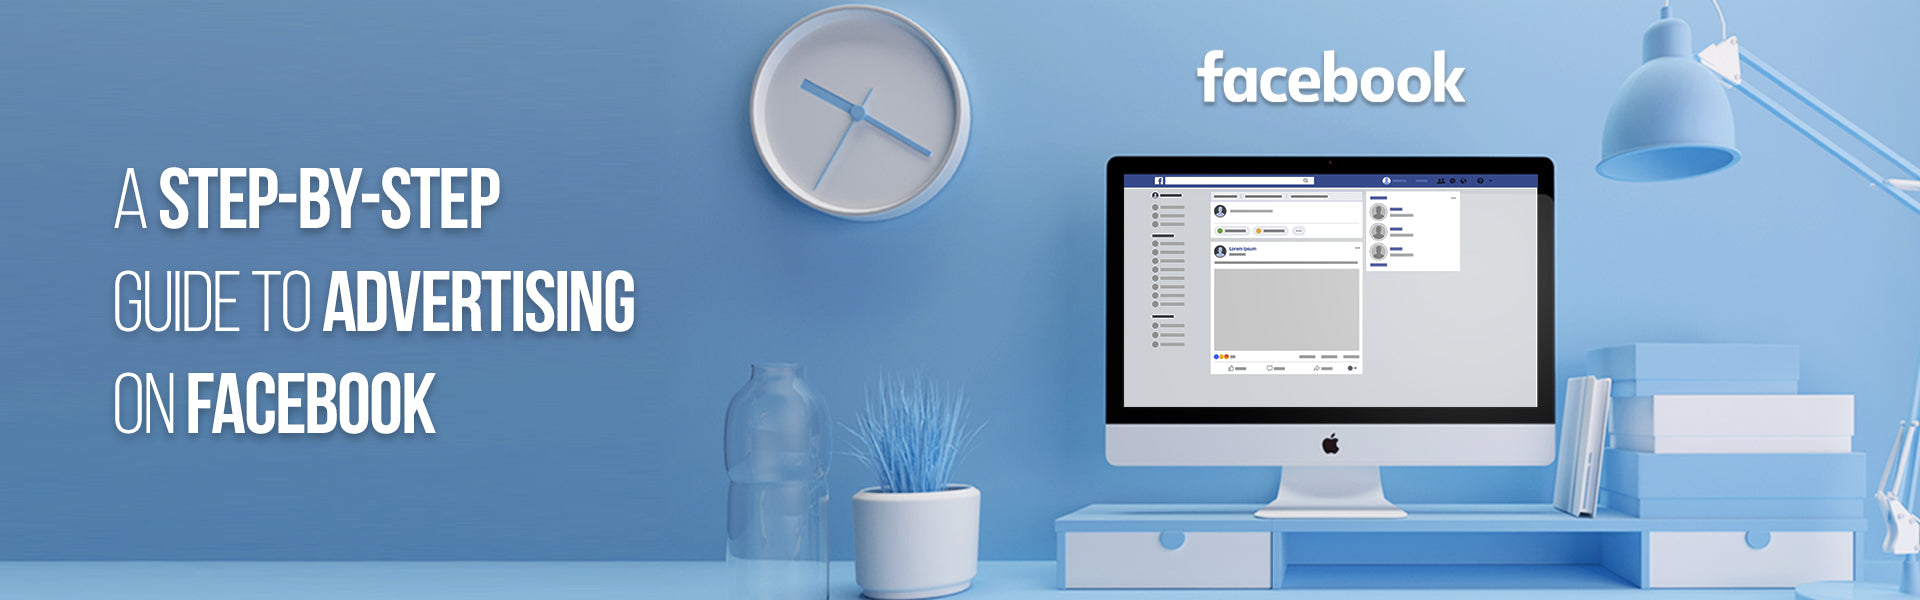 A Step-by-Step Guide to Advertising on Facebook